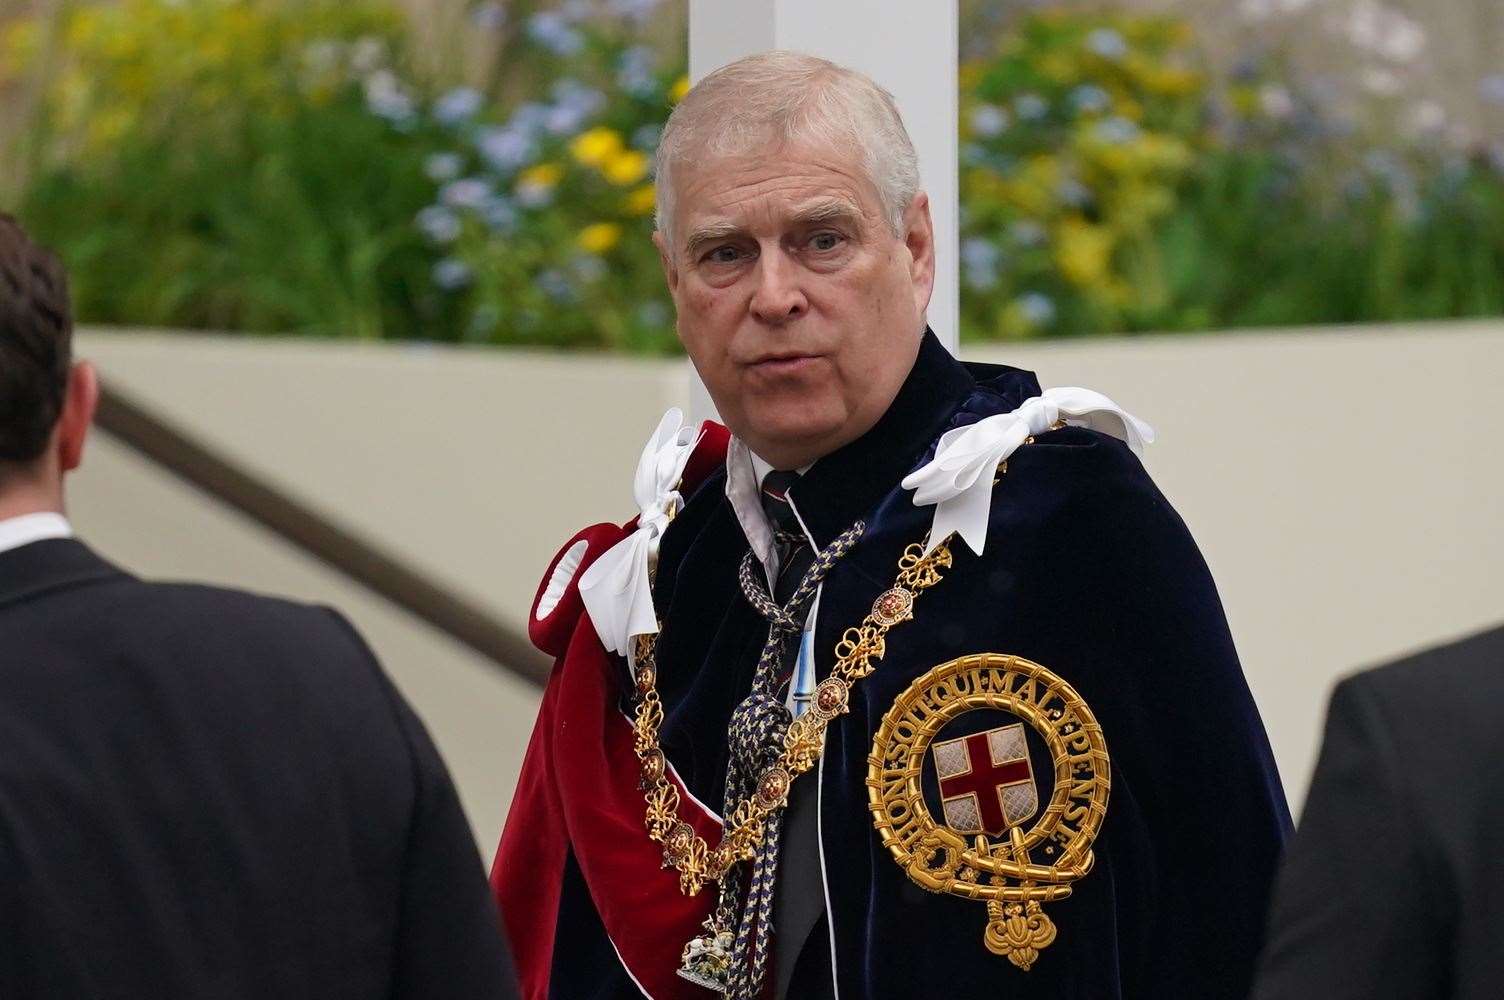 The Duke of York denies the allegations (PA)